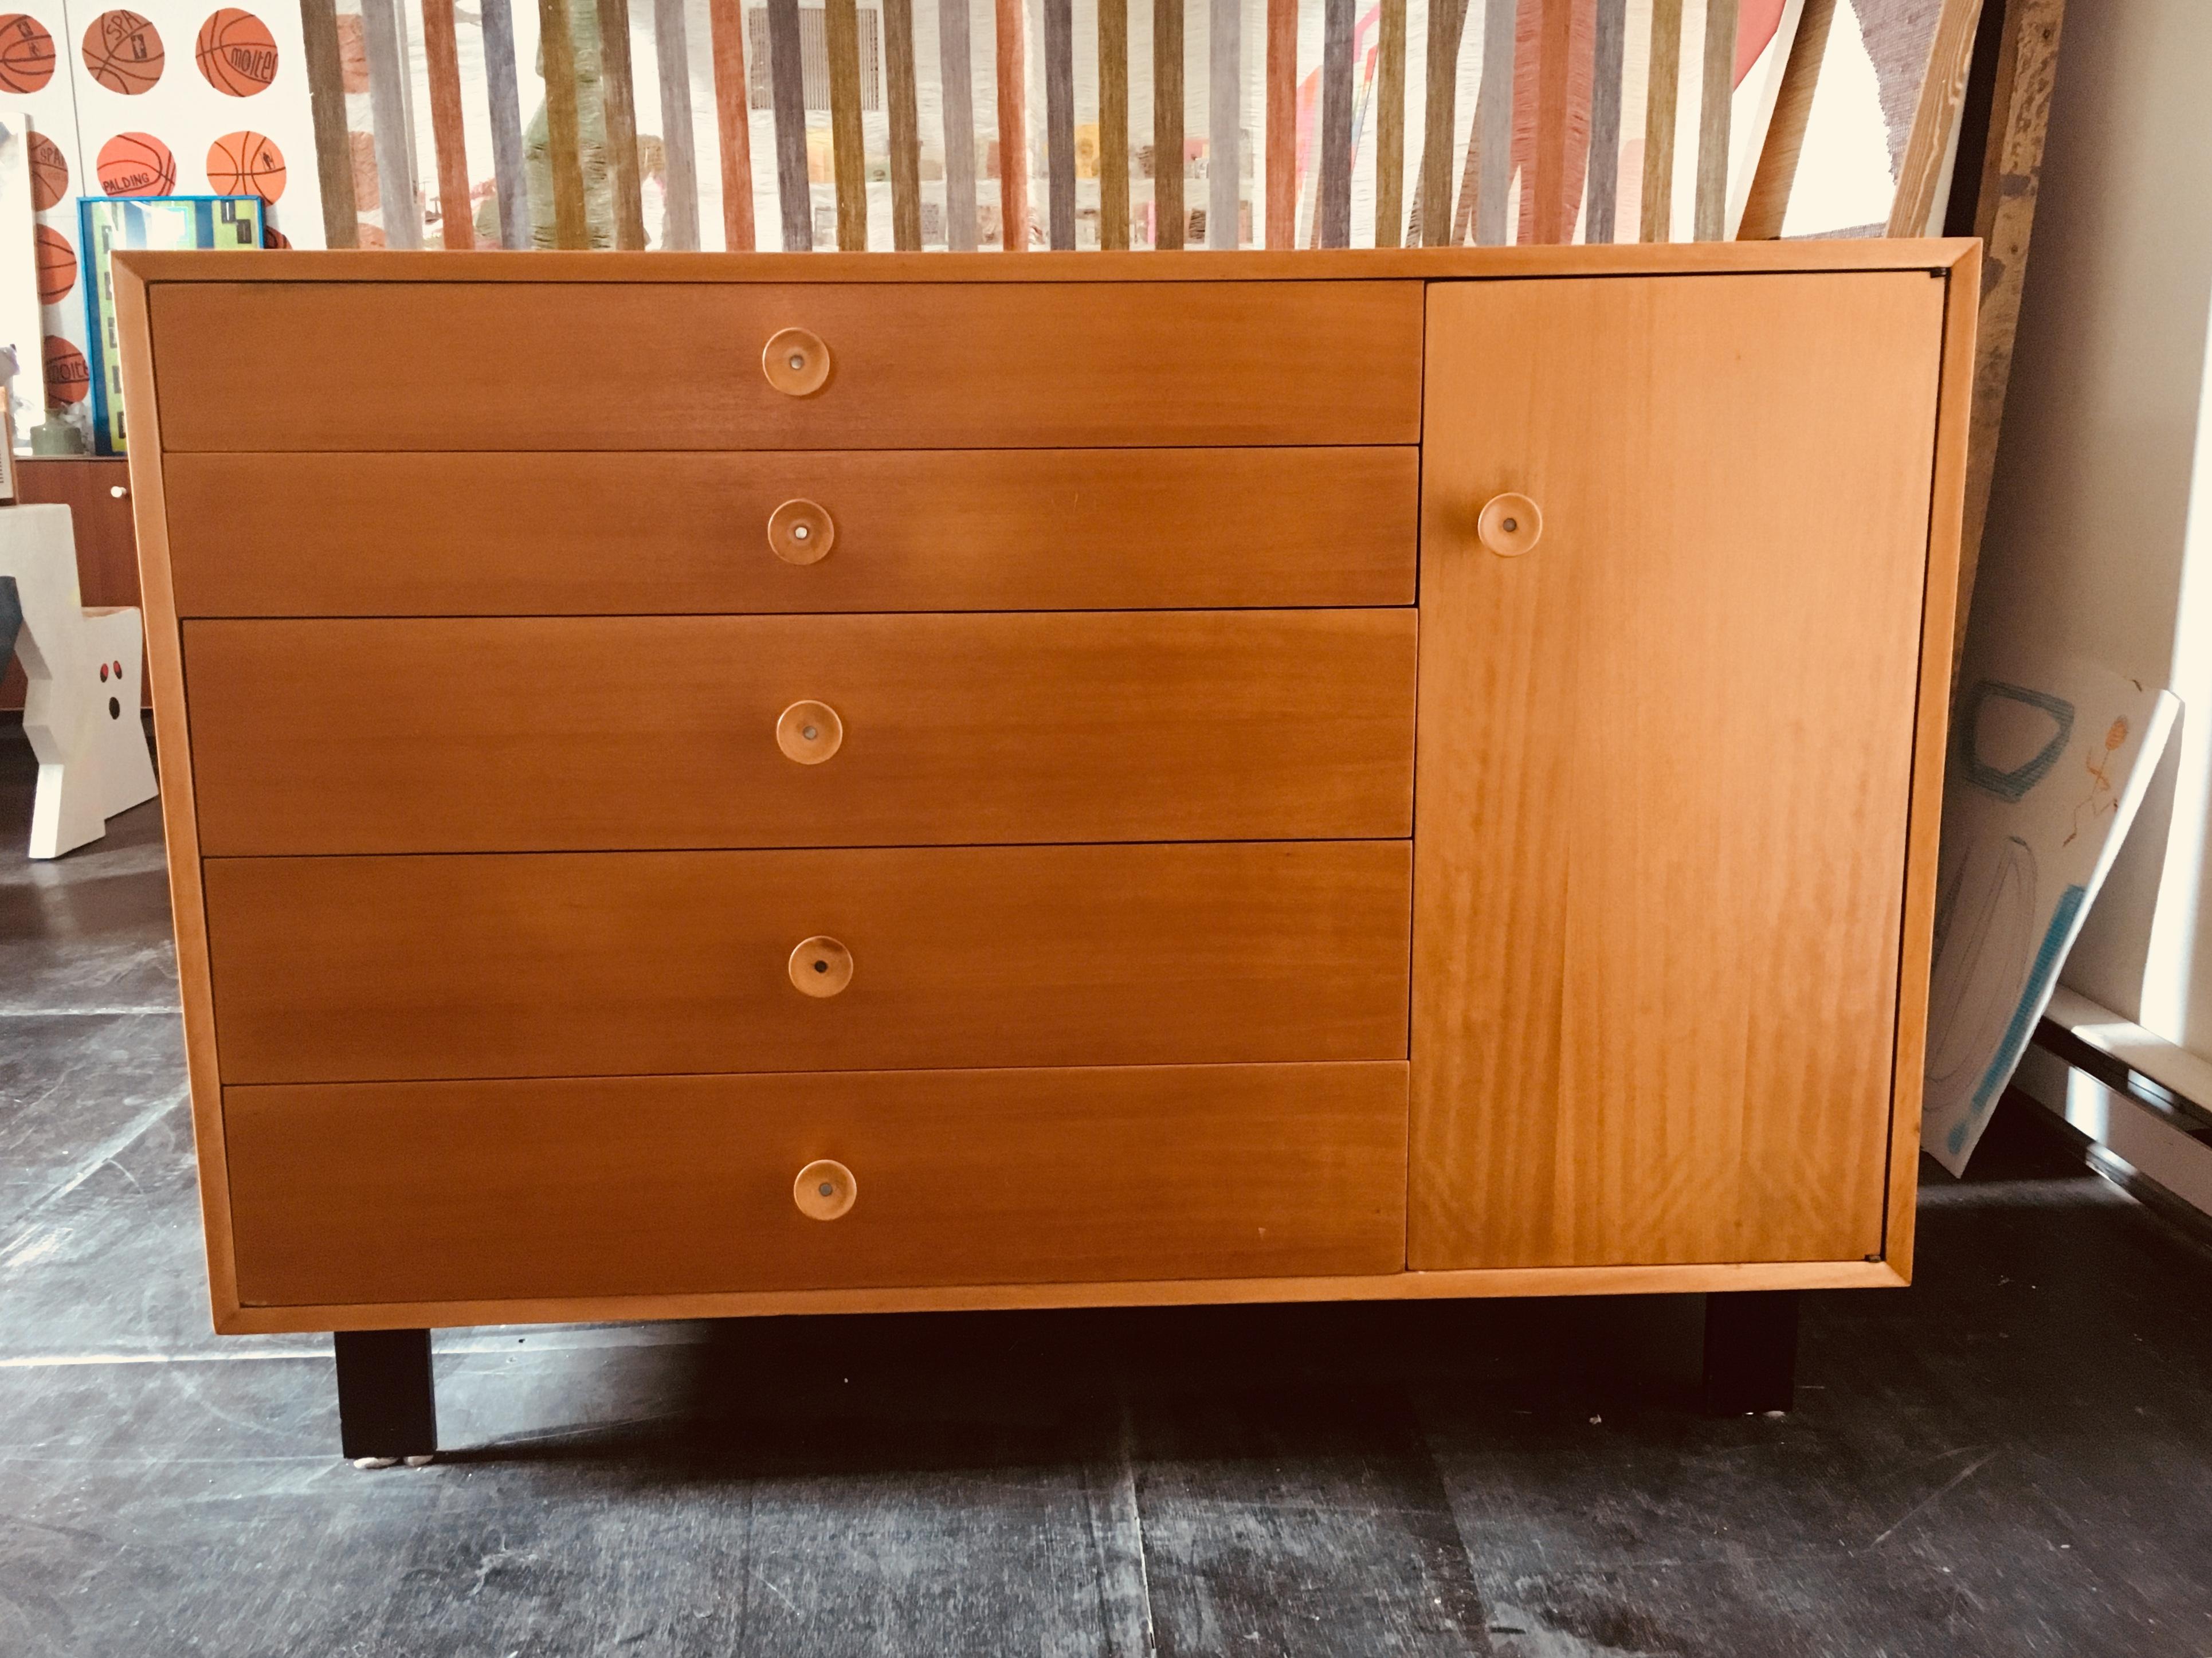 Five-drawer Birch dresser with side cabinet containing two adjustable shelves, designed by George Nelson for Herman Miller, ca 1950. 
Identifying label in the upper drawer, excellent vintage condition.